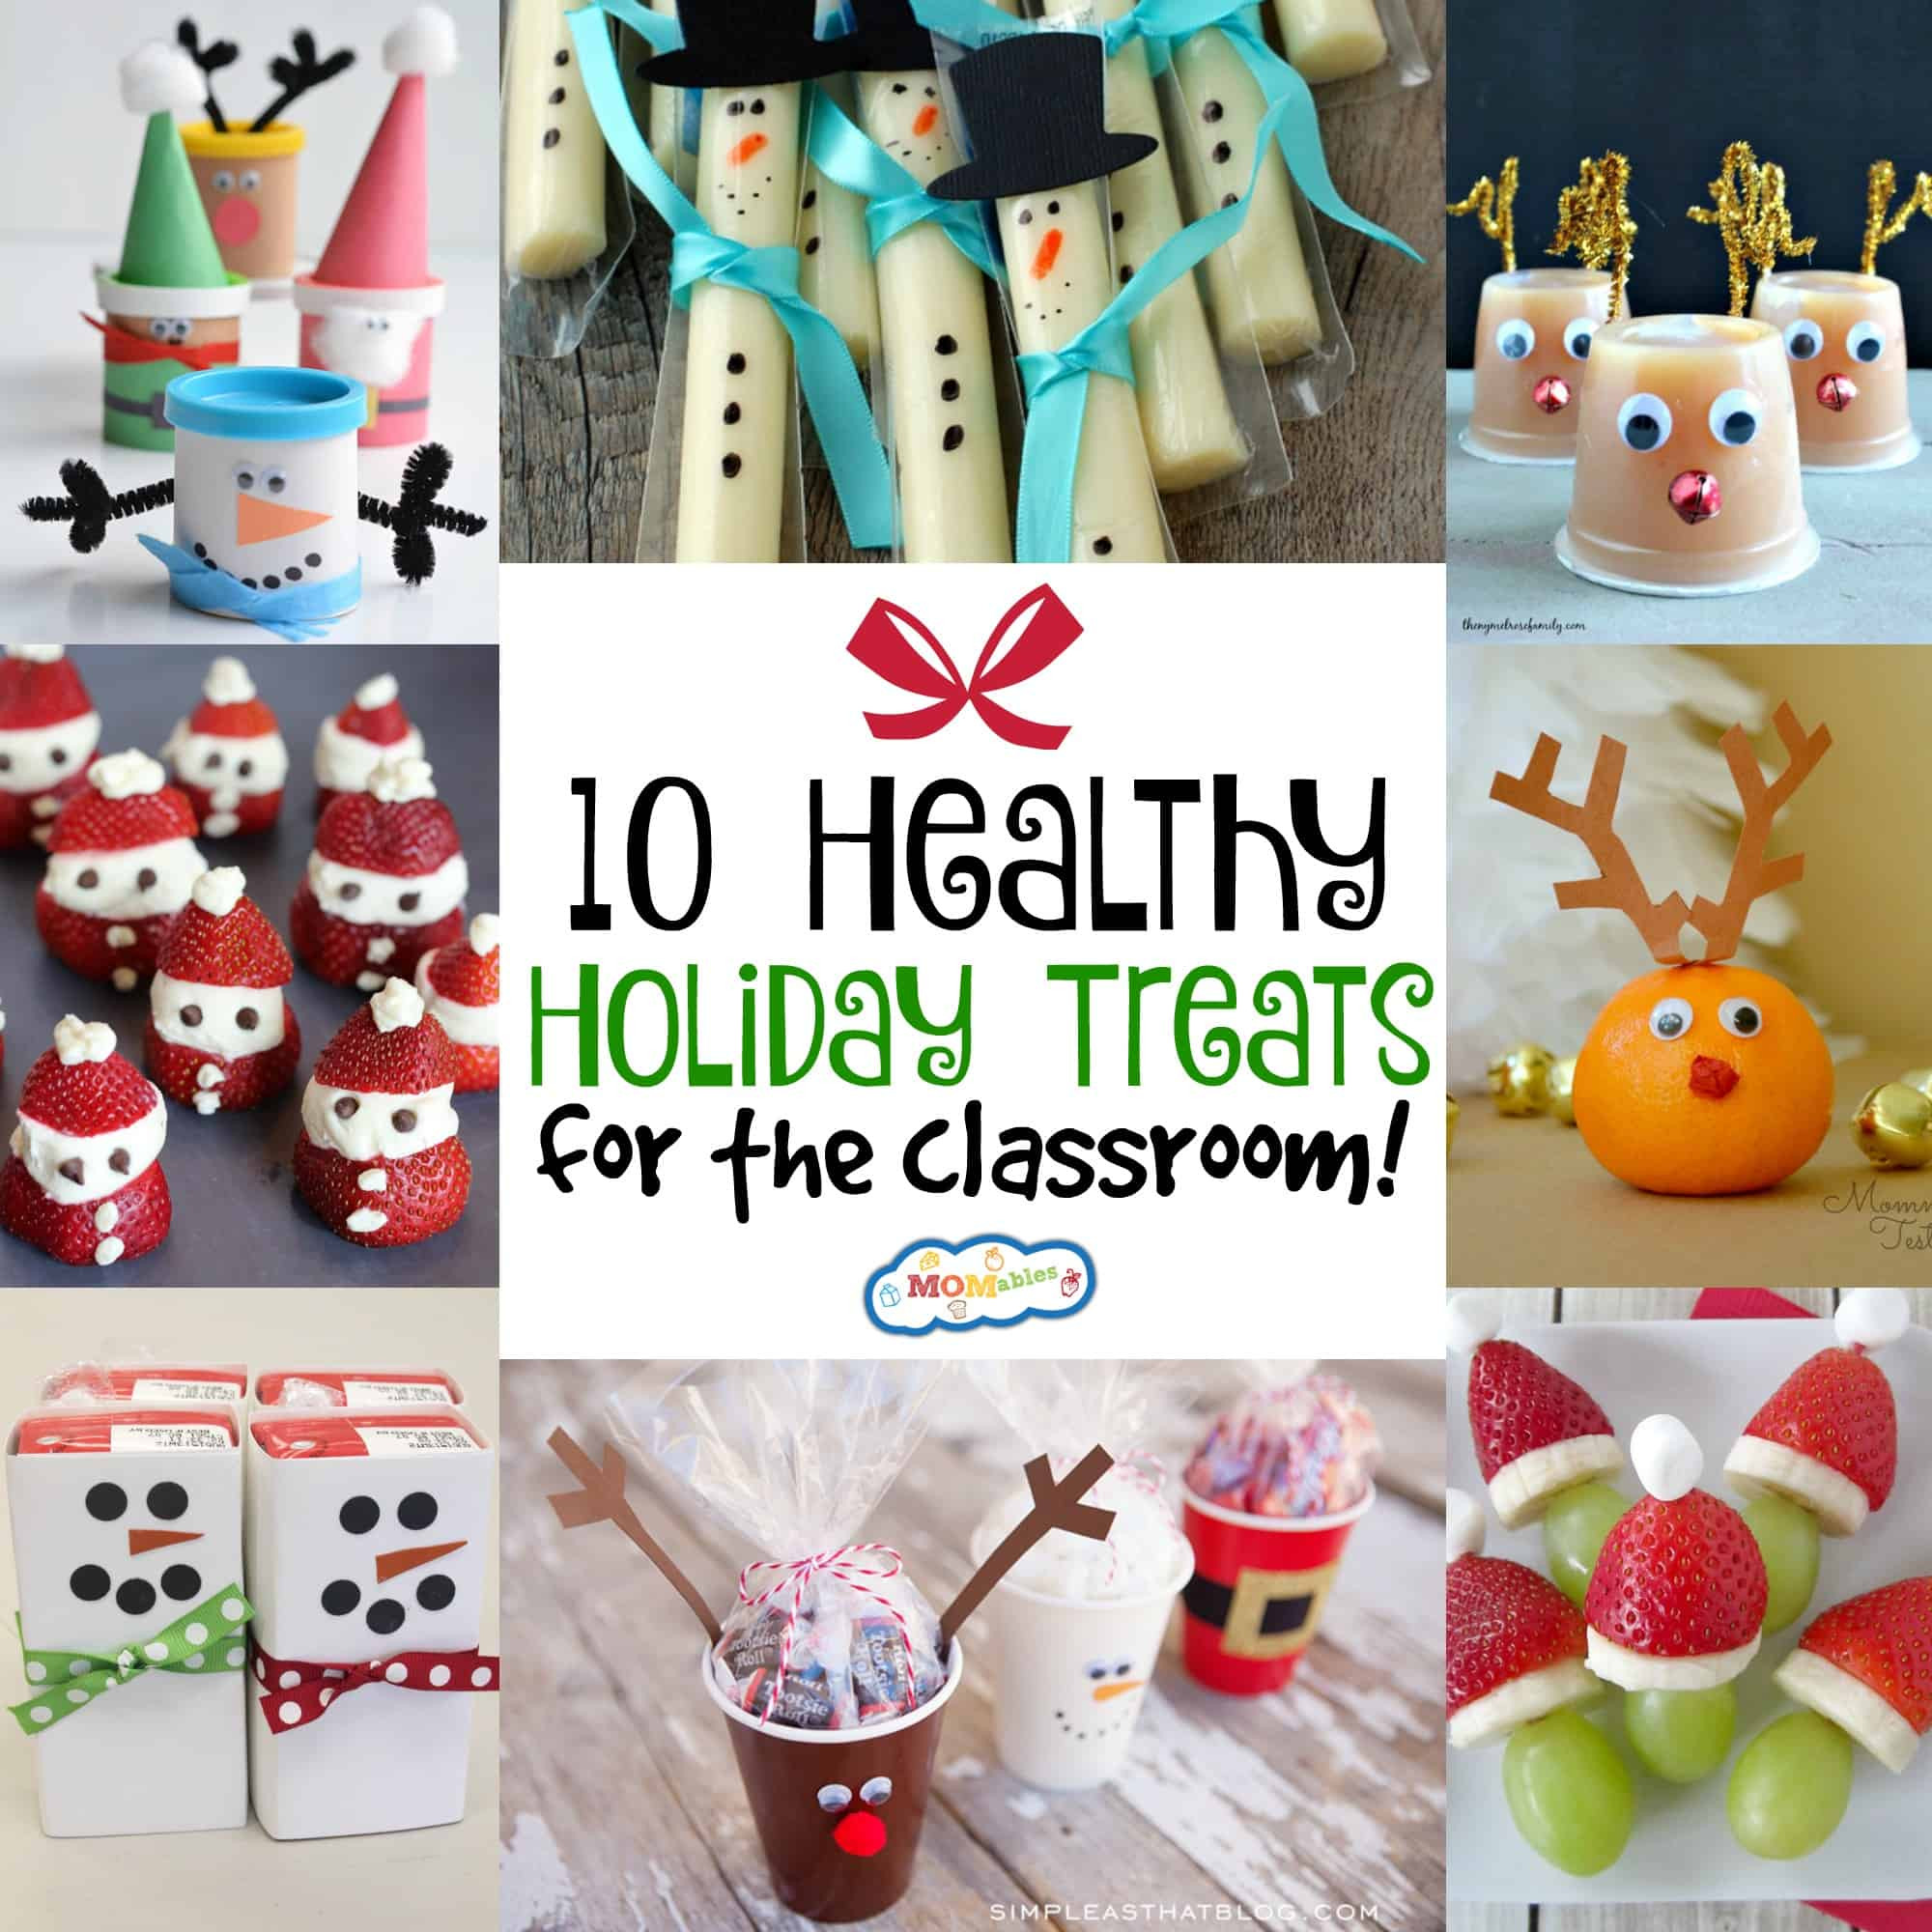 Preschool Christmas Party Ideas
 10 Healthy Holiday Treats for the Classroom MOMables